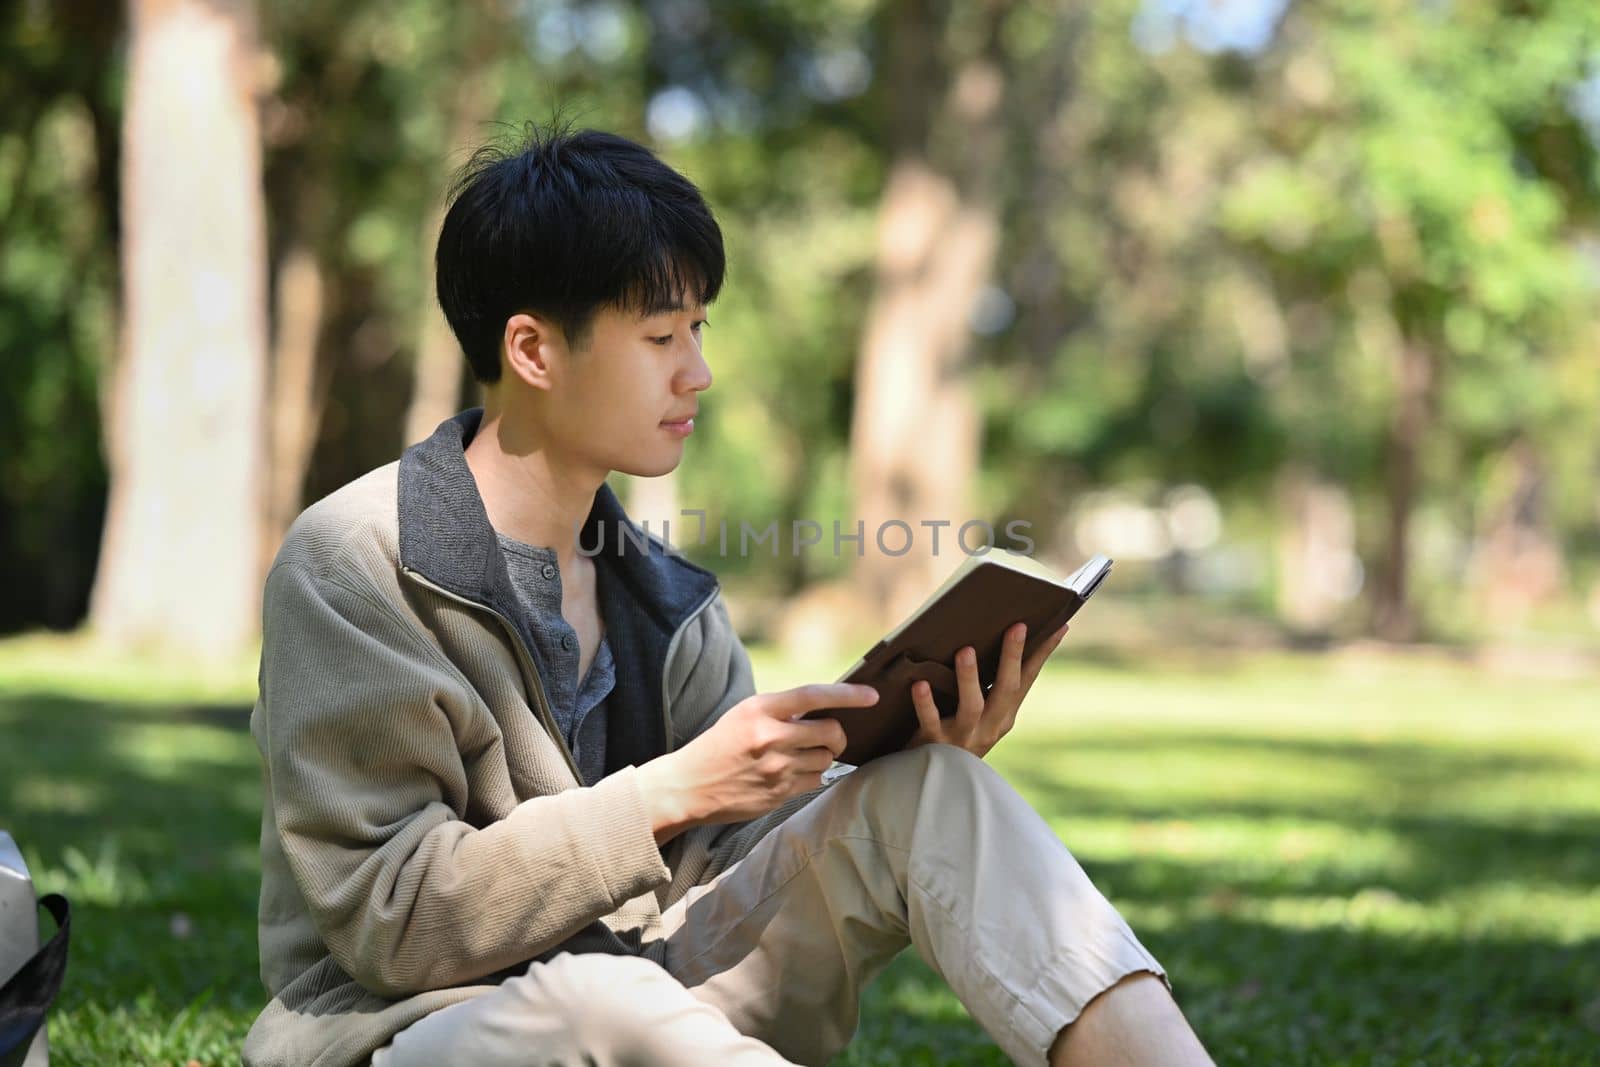 Peaceful college student reading book, relaxing on campus lawn. Education and lifestyle concept.